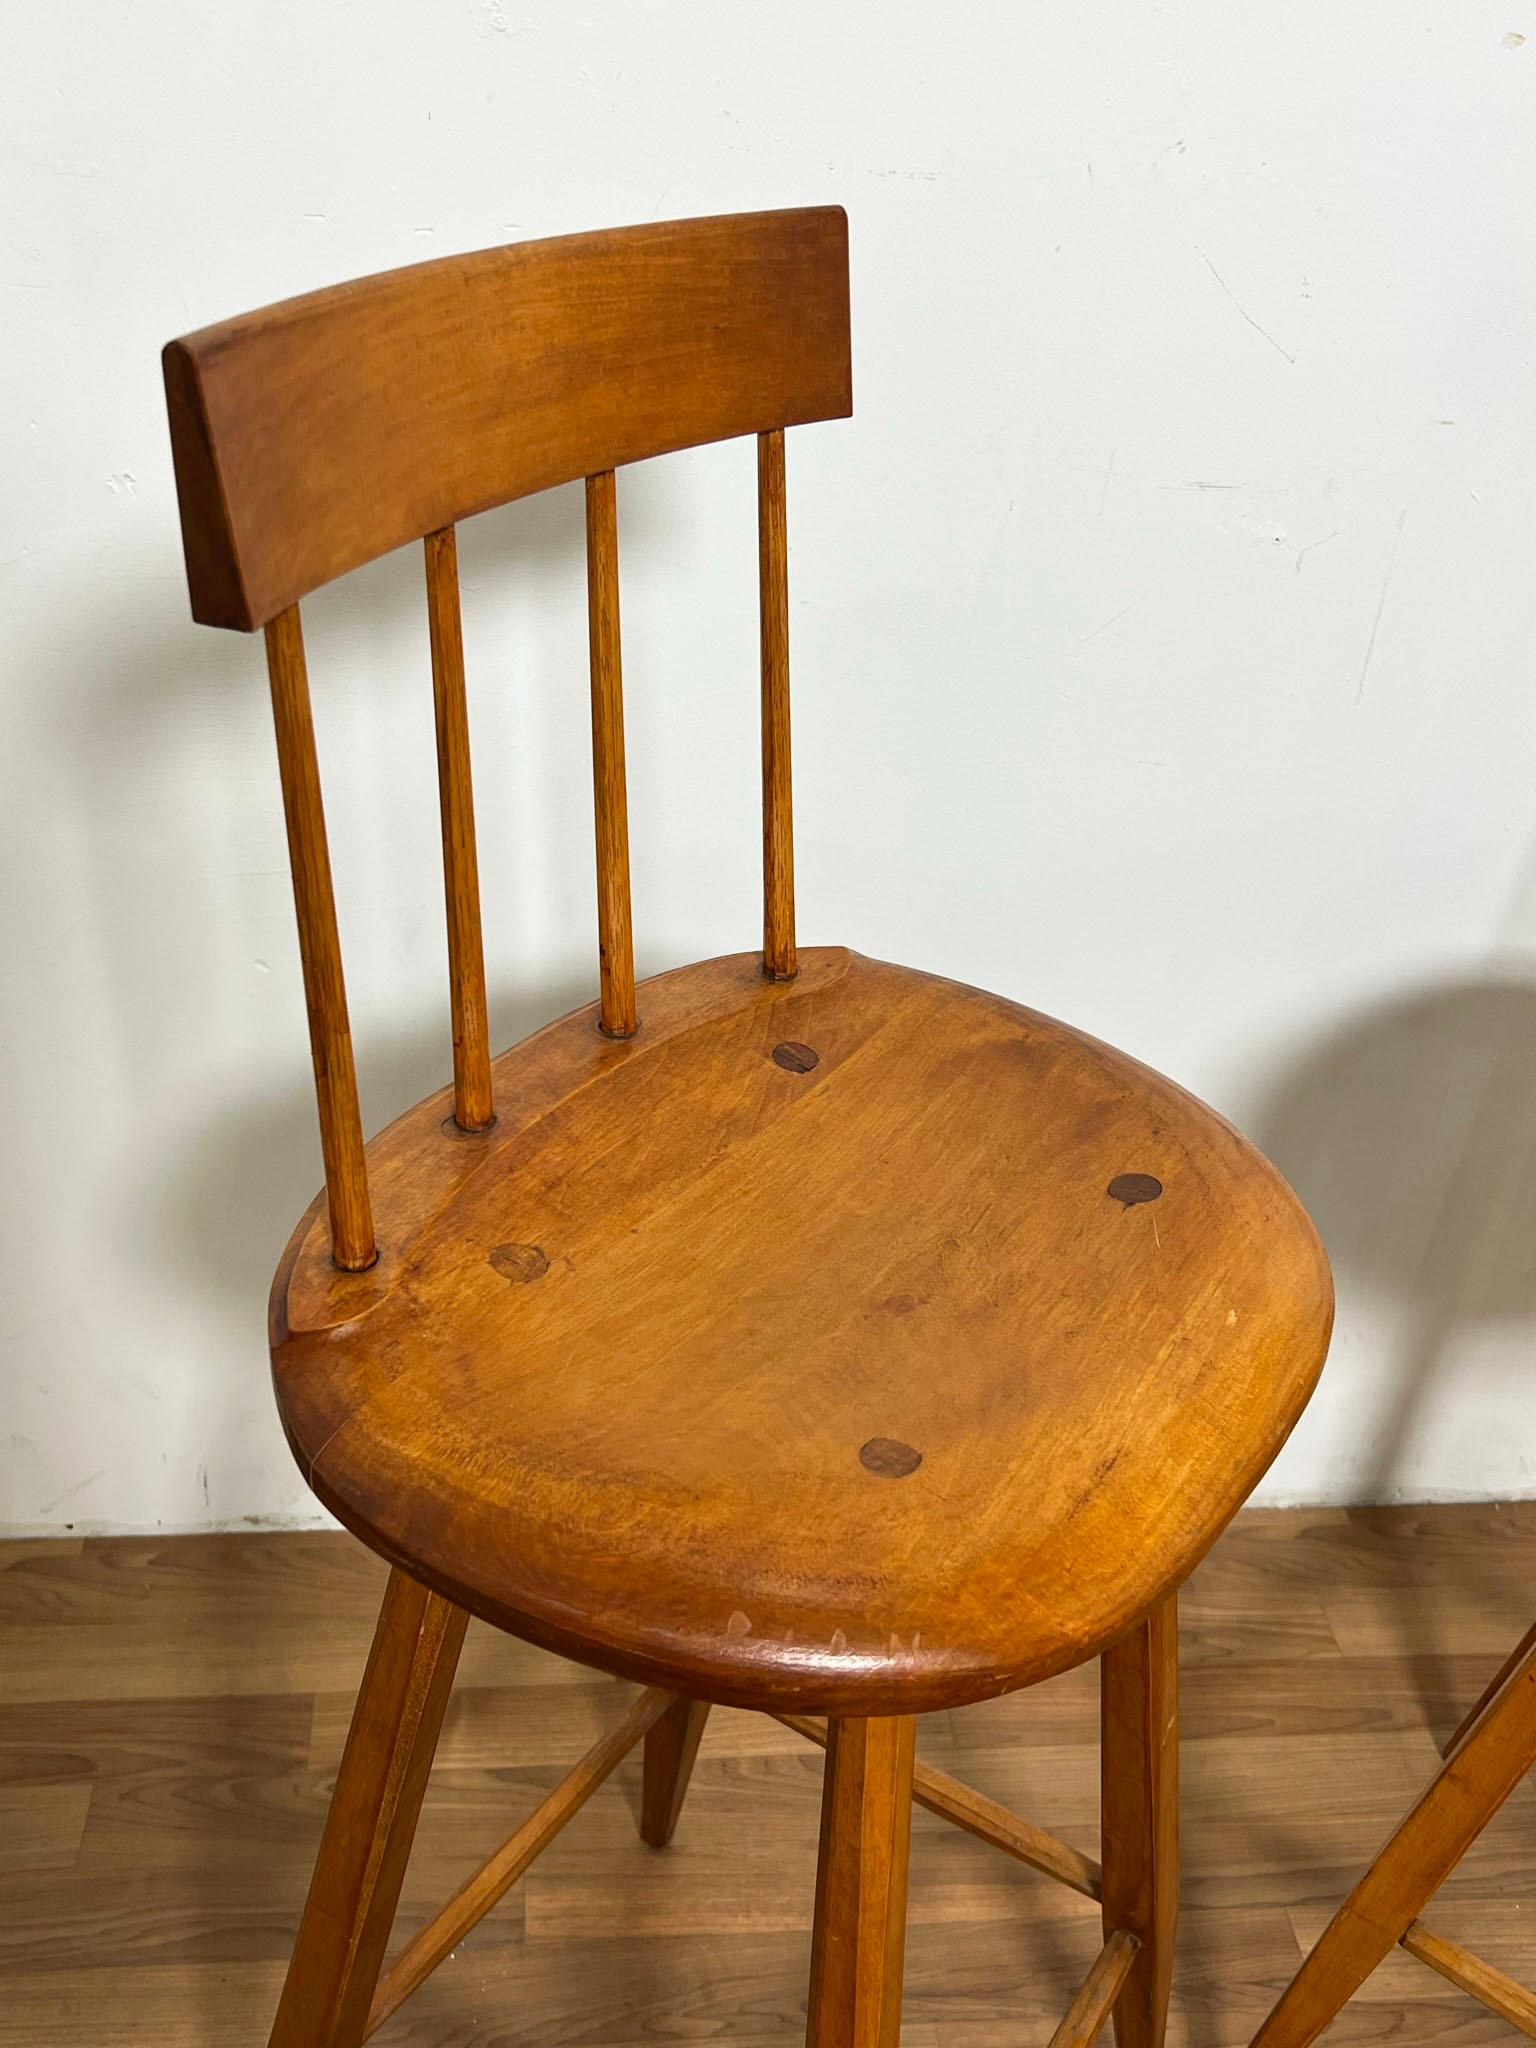 Pair of Hand Made Studio Craft Bar Stools by Bill Woodhead, D. 1985 In Good Condition For Sale In Peabody, MA